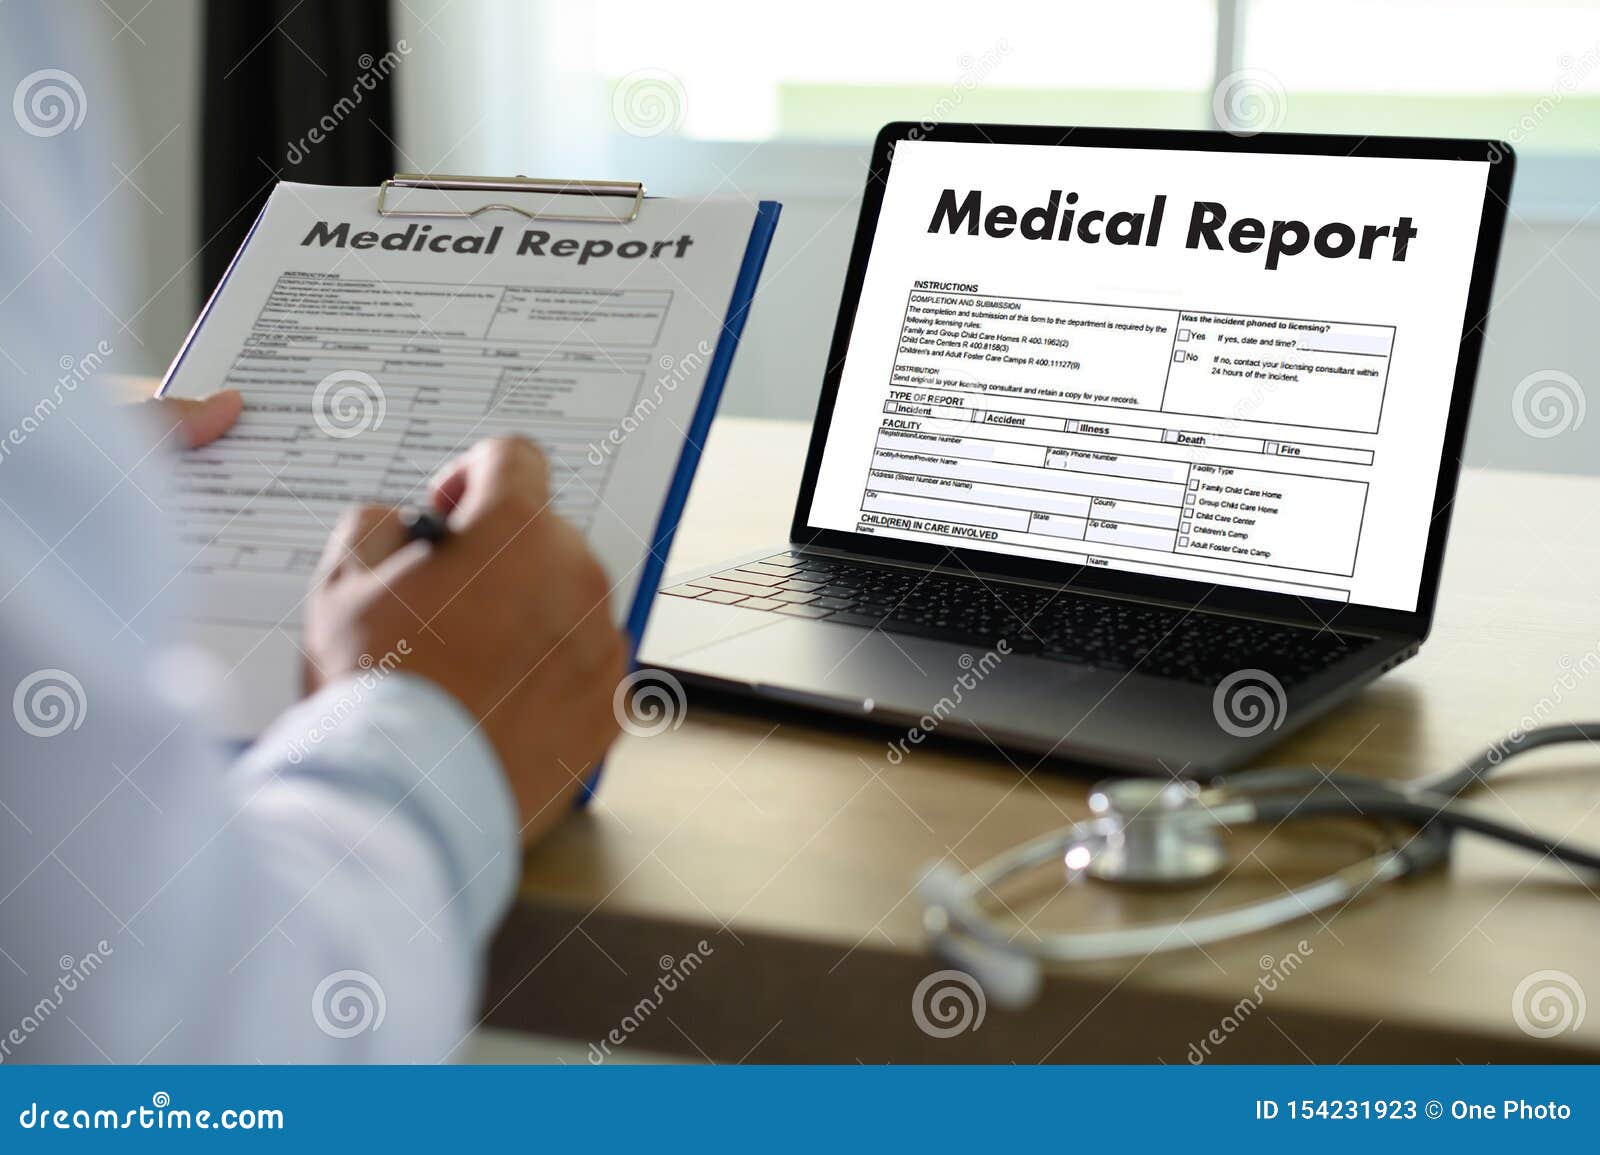 medical records patient information medical technology concept